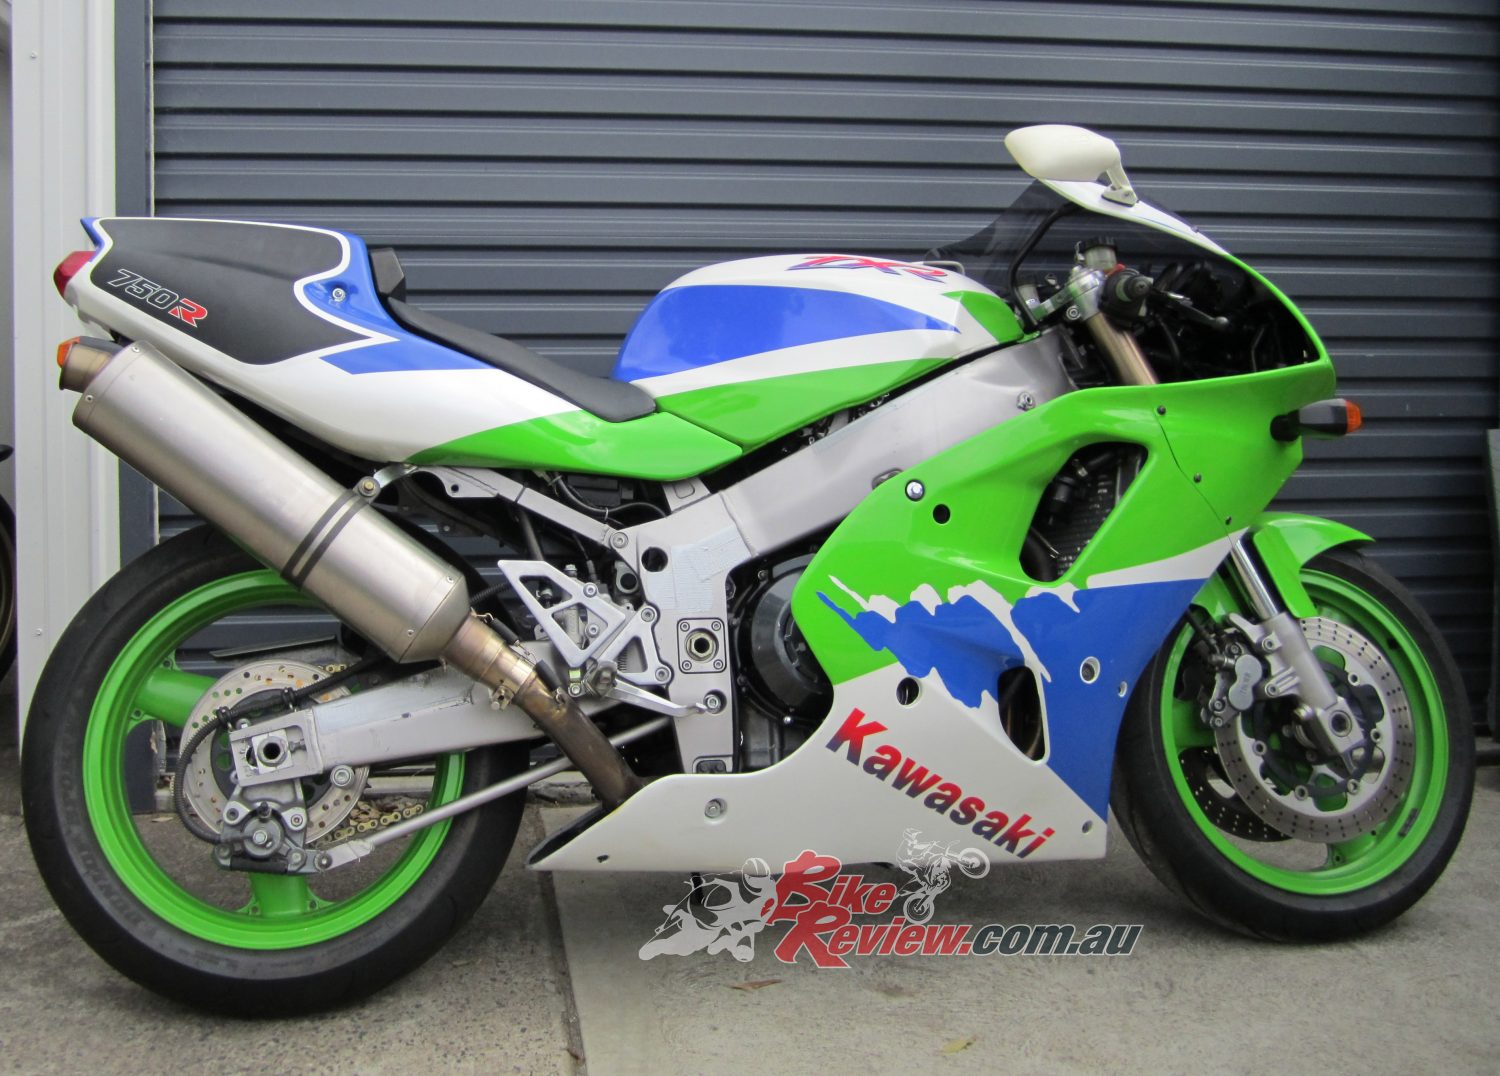 Tim's ZXR750RR back in the day...